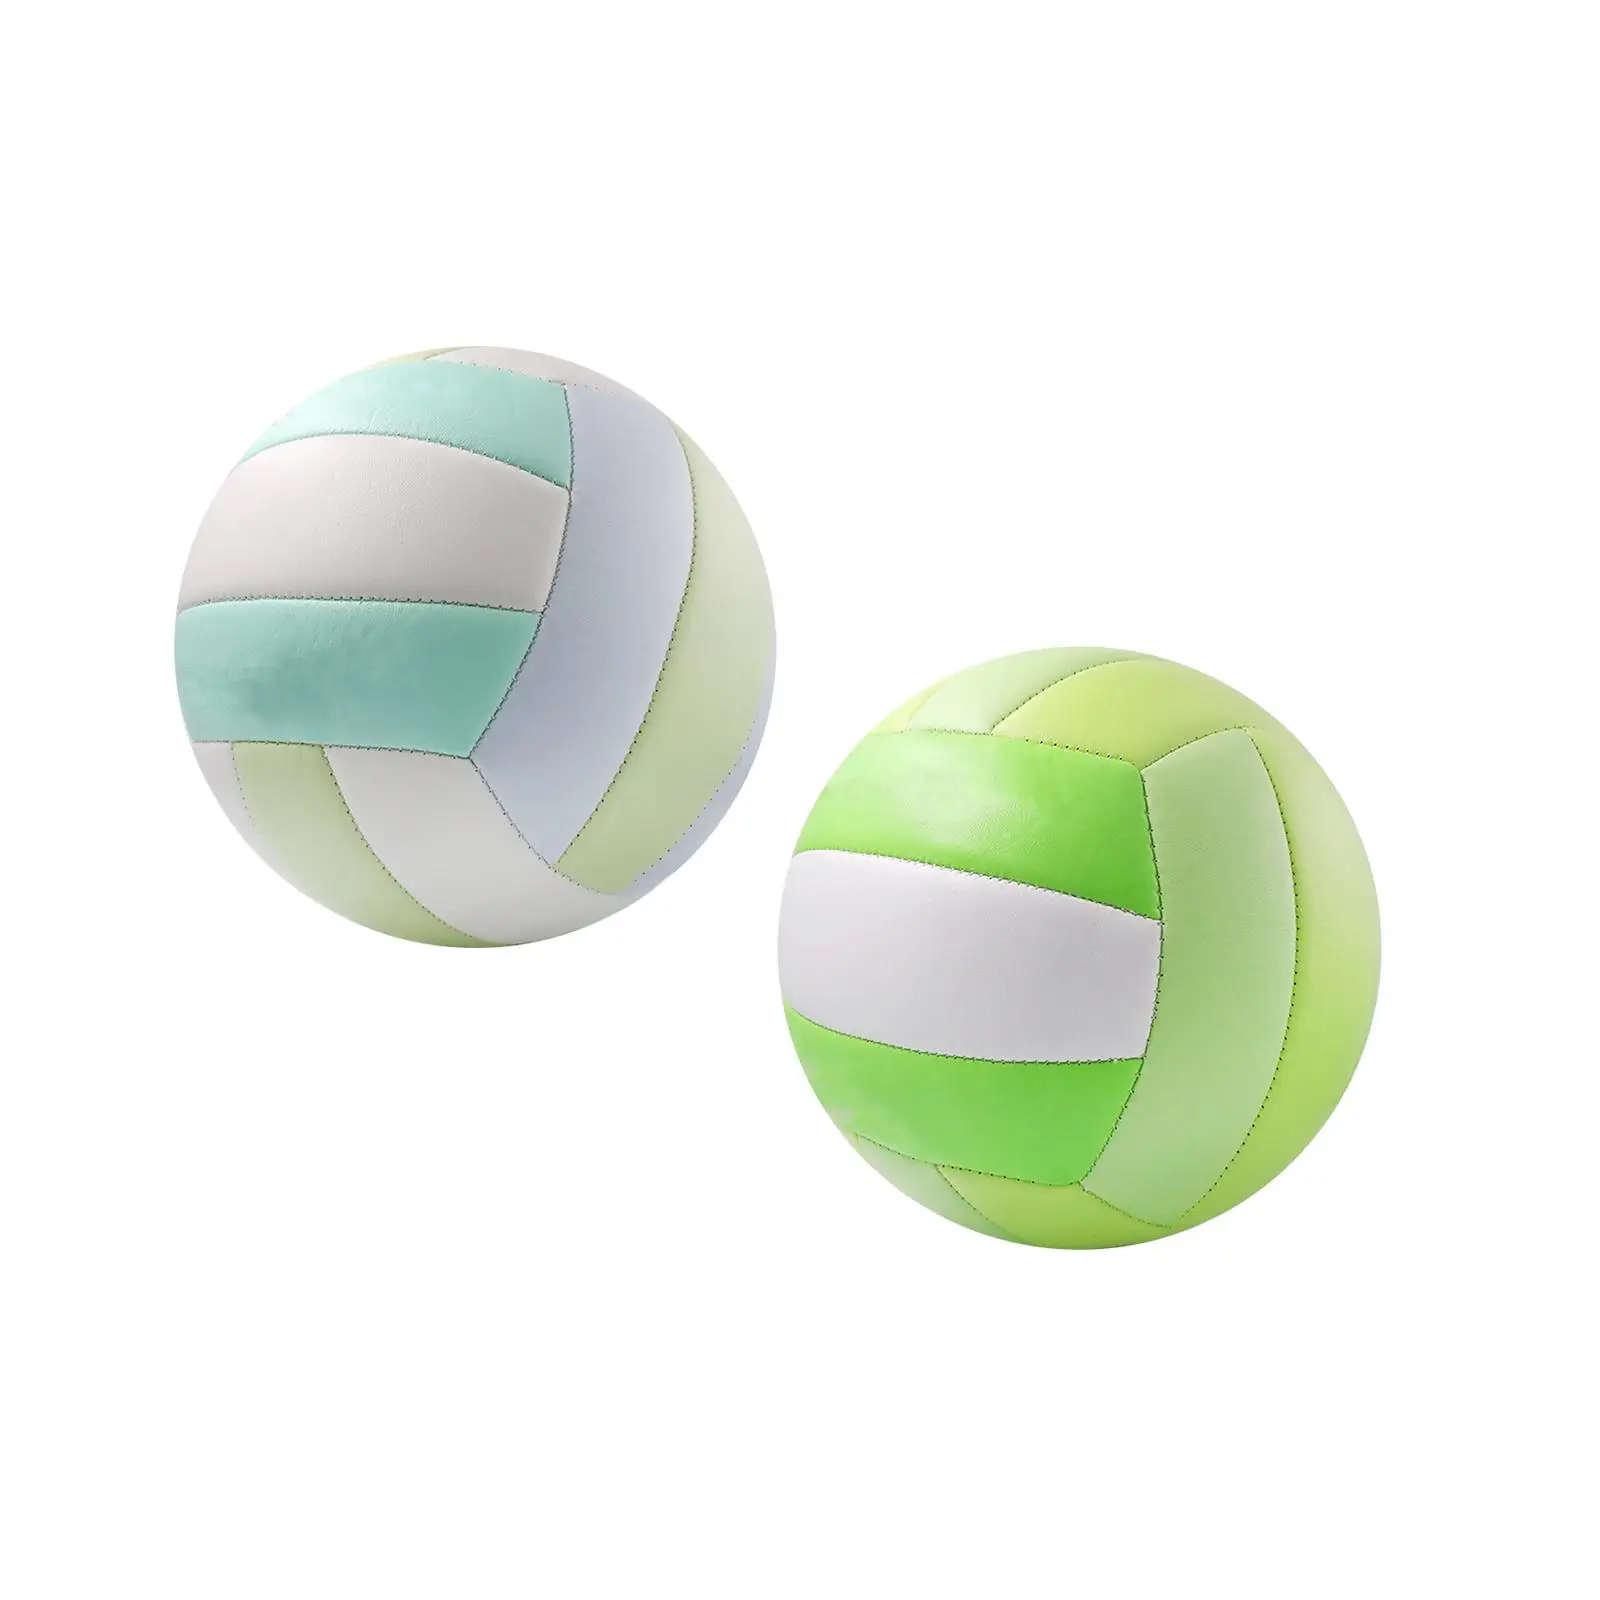 Beach Volleyball Gym Official Size 5 Volleyball for Men Women Youth Teenager